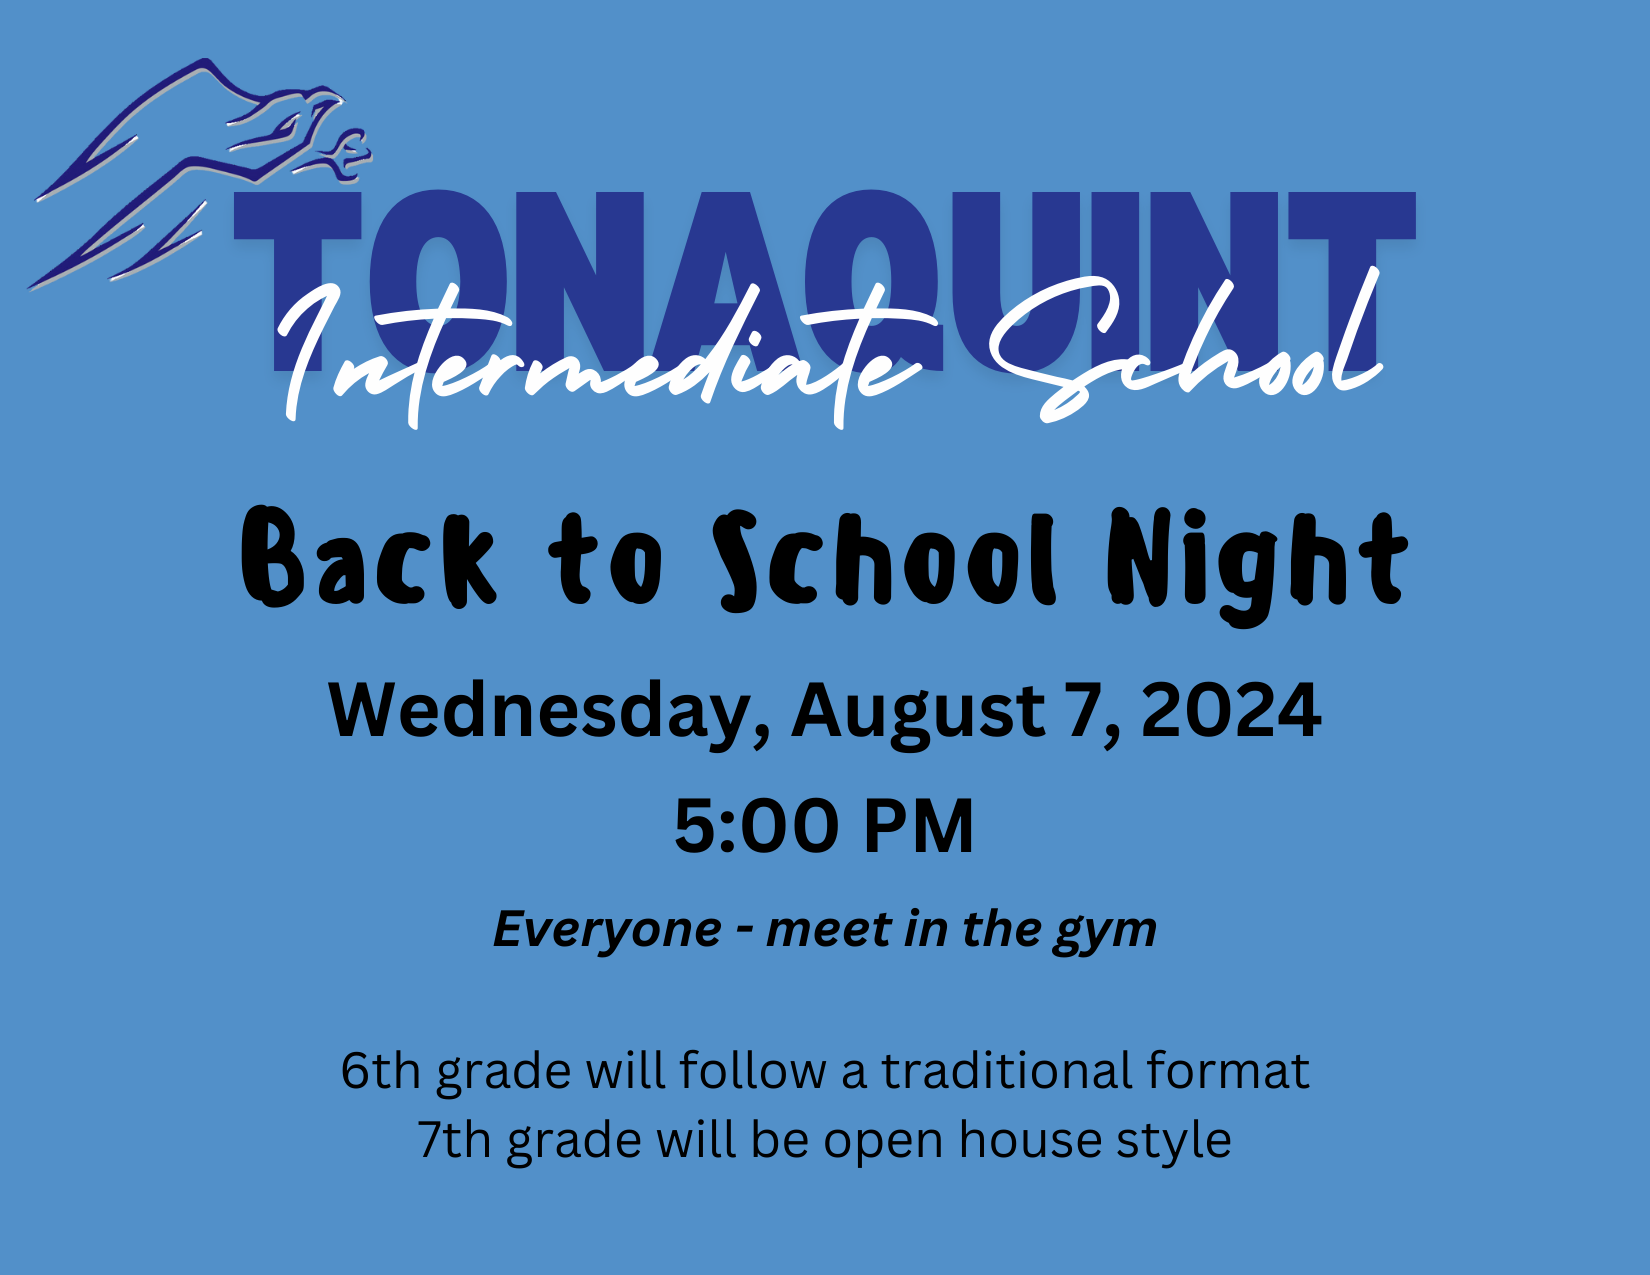 Back to School Night, Wednesday, 8/7/24 @5pm. Everyone start in the gym. 6th grade will follow they traditional format while 7th grade will use the open house format.